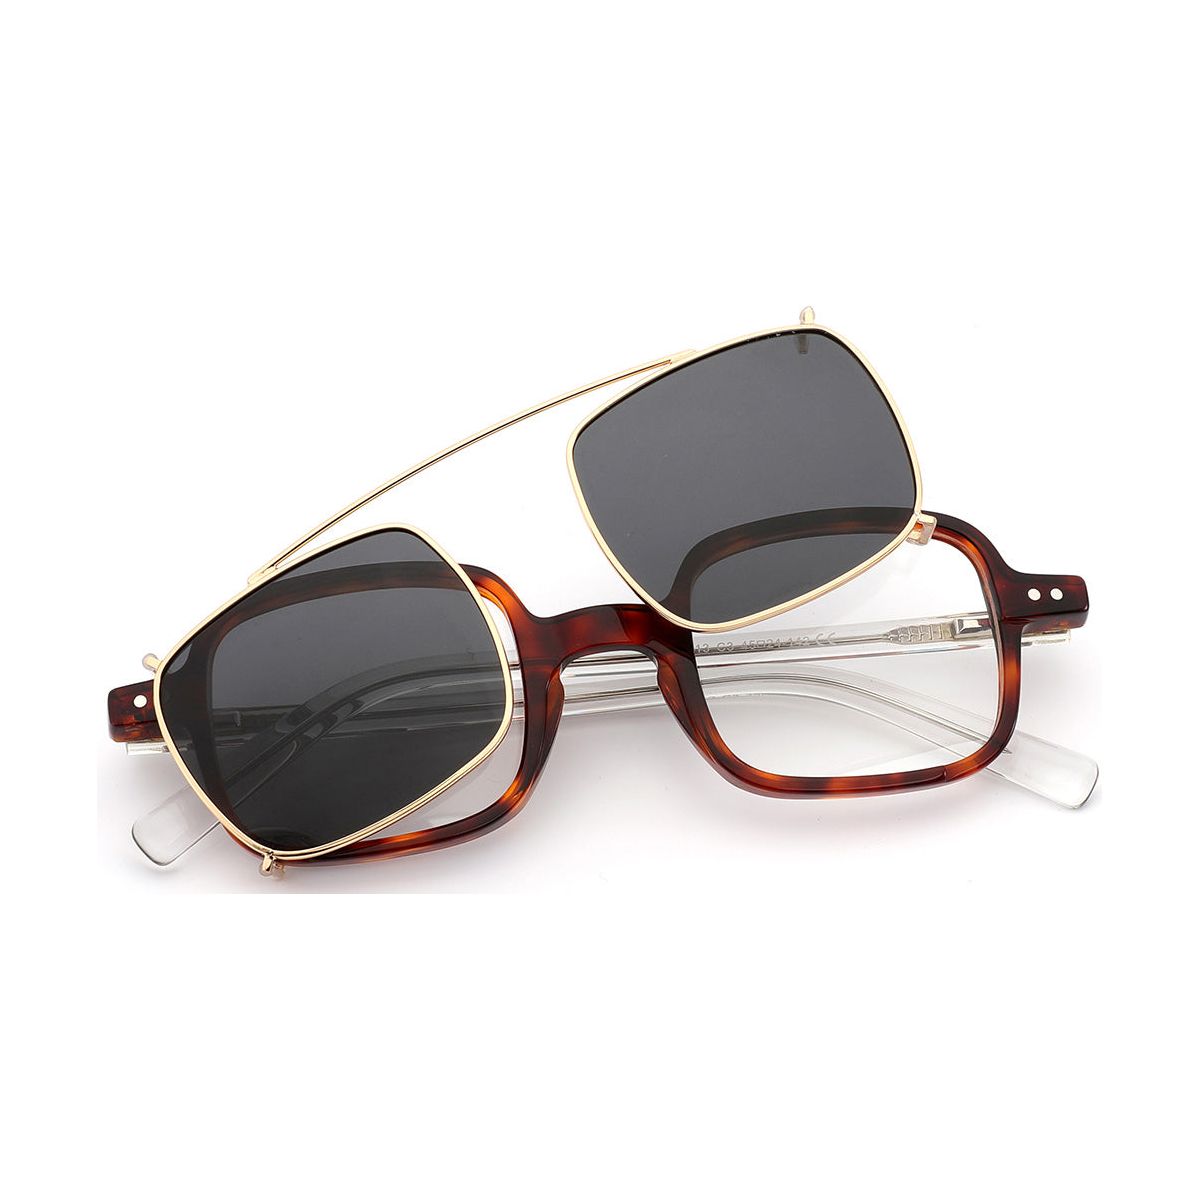 Candye Clip-Ons Acetate Square Frame F6329 